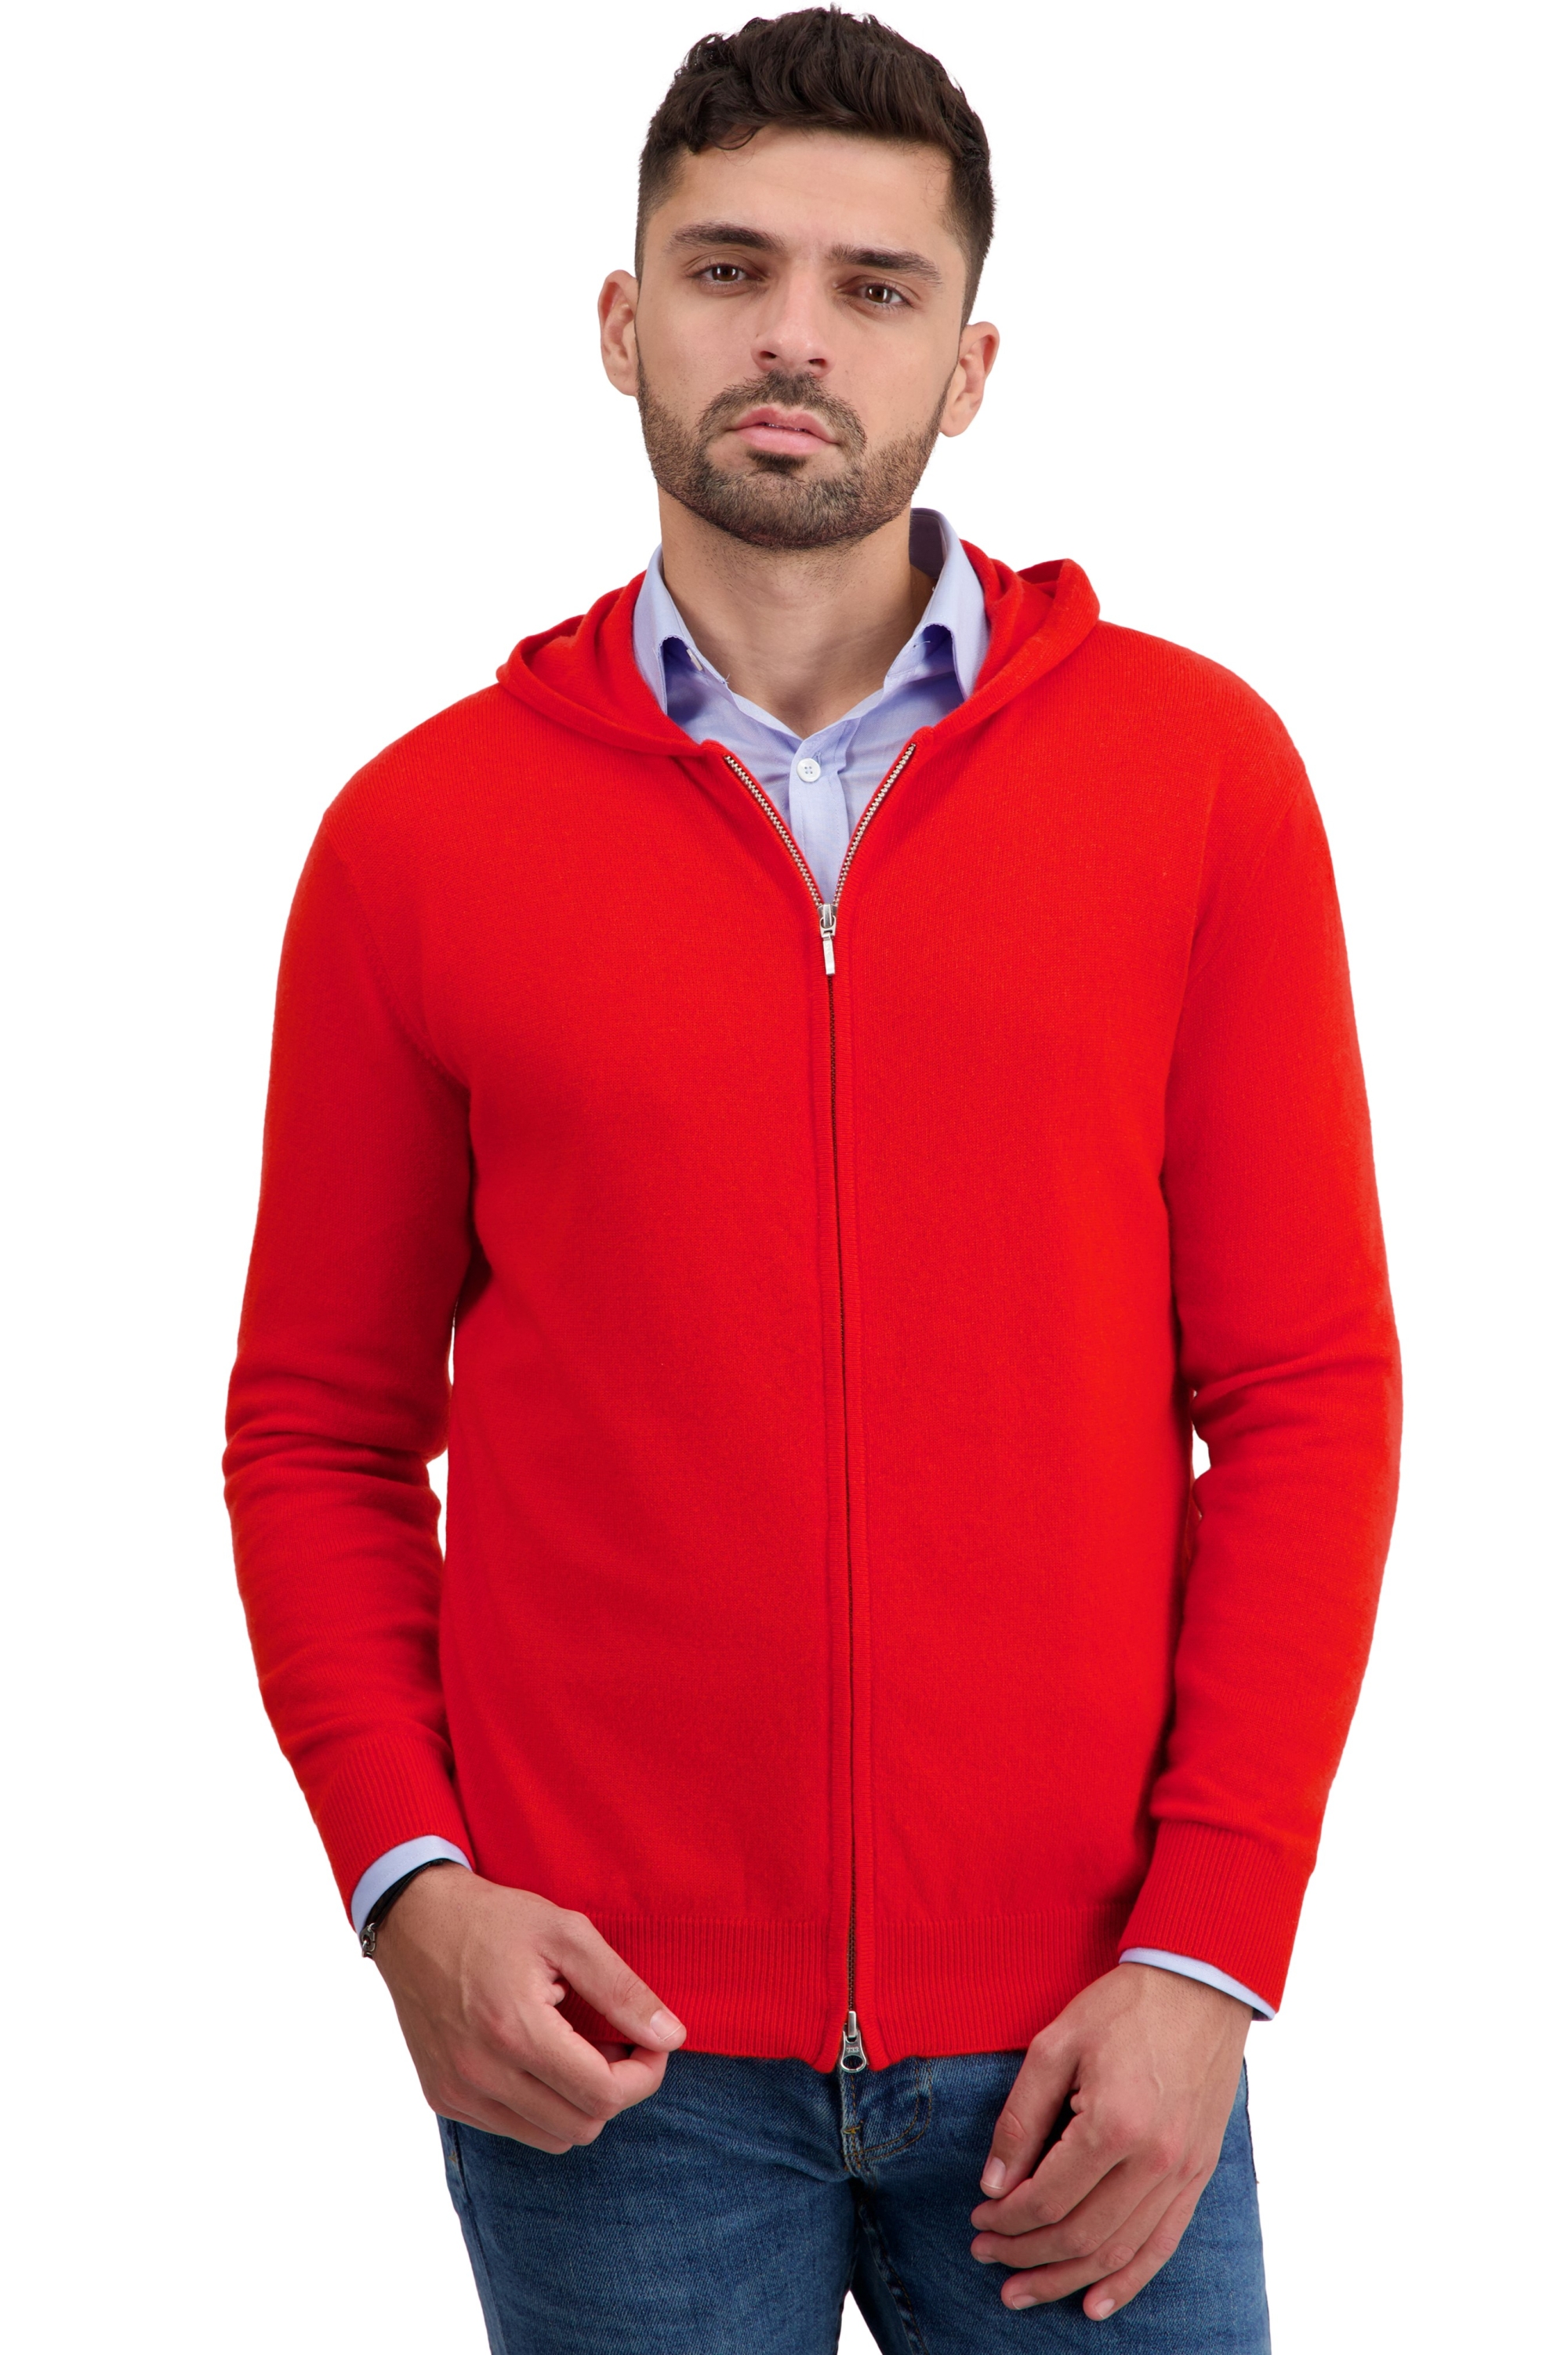 Cashmere men basic sweaters at low prices taboo first tomato m